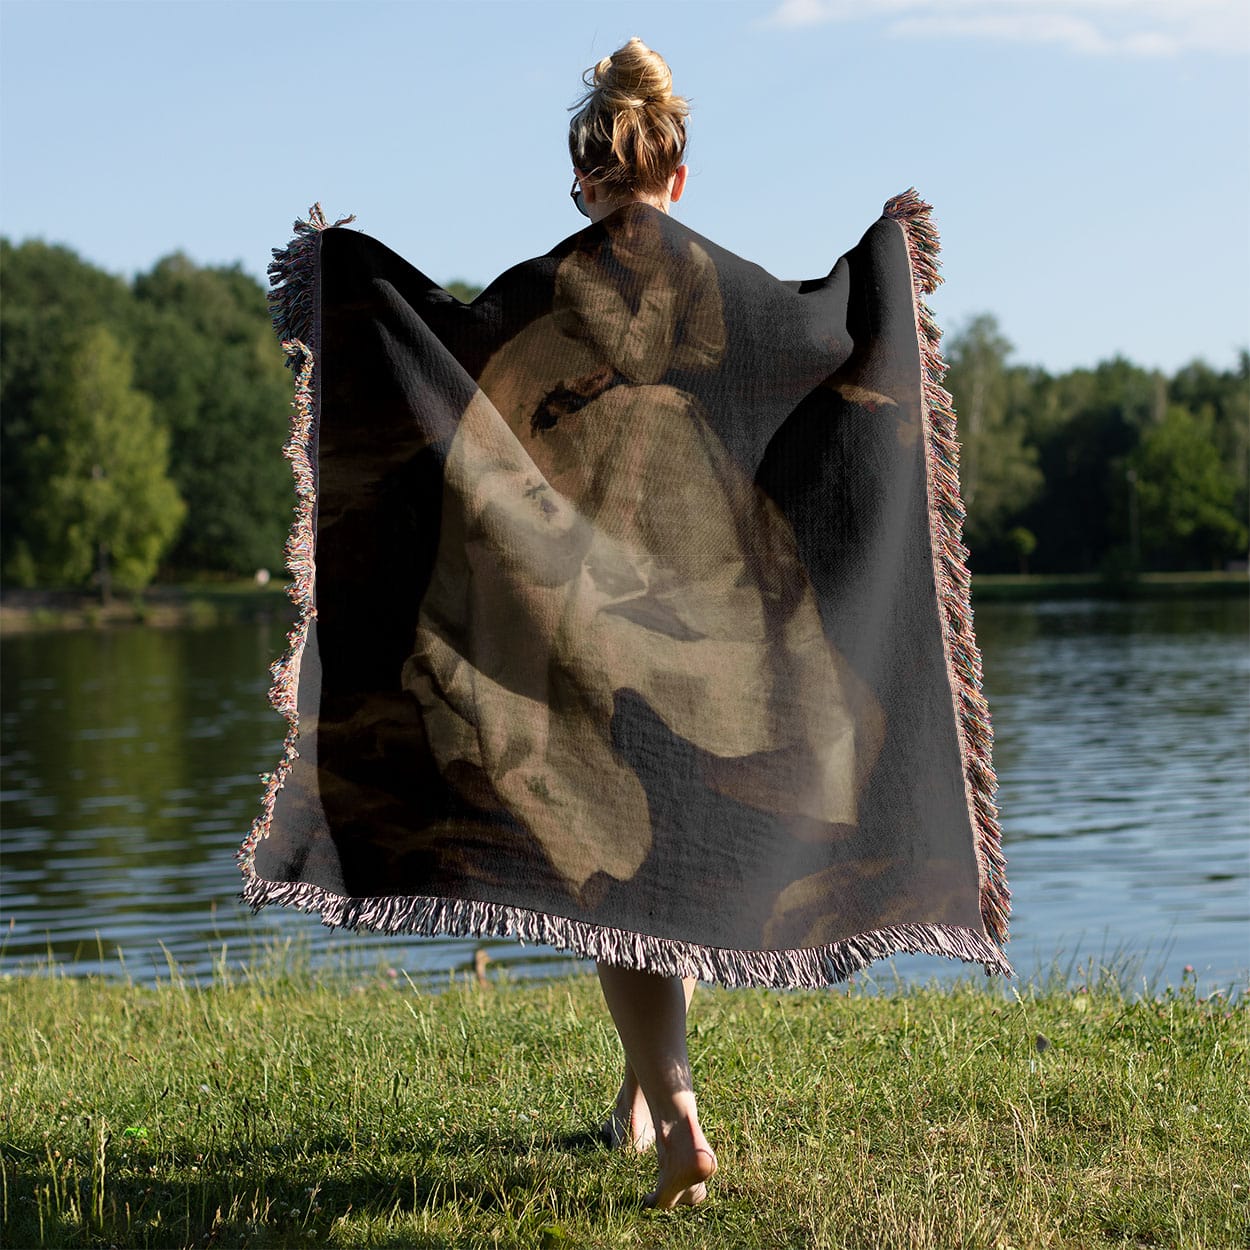 Dark Victorian Painting Woven Blanket Held on a Woman's Back Outside